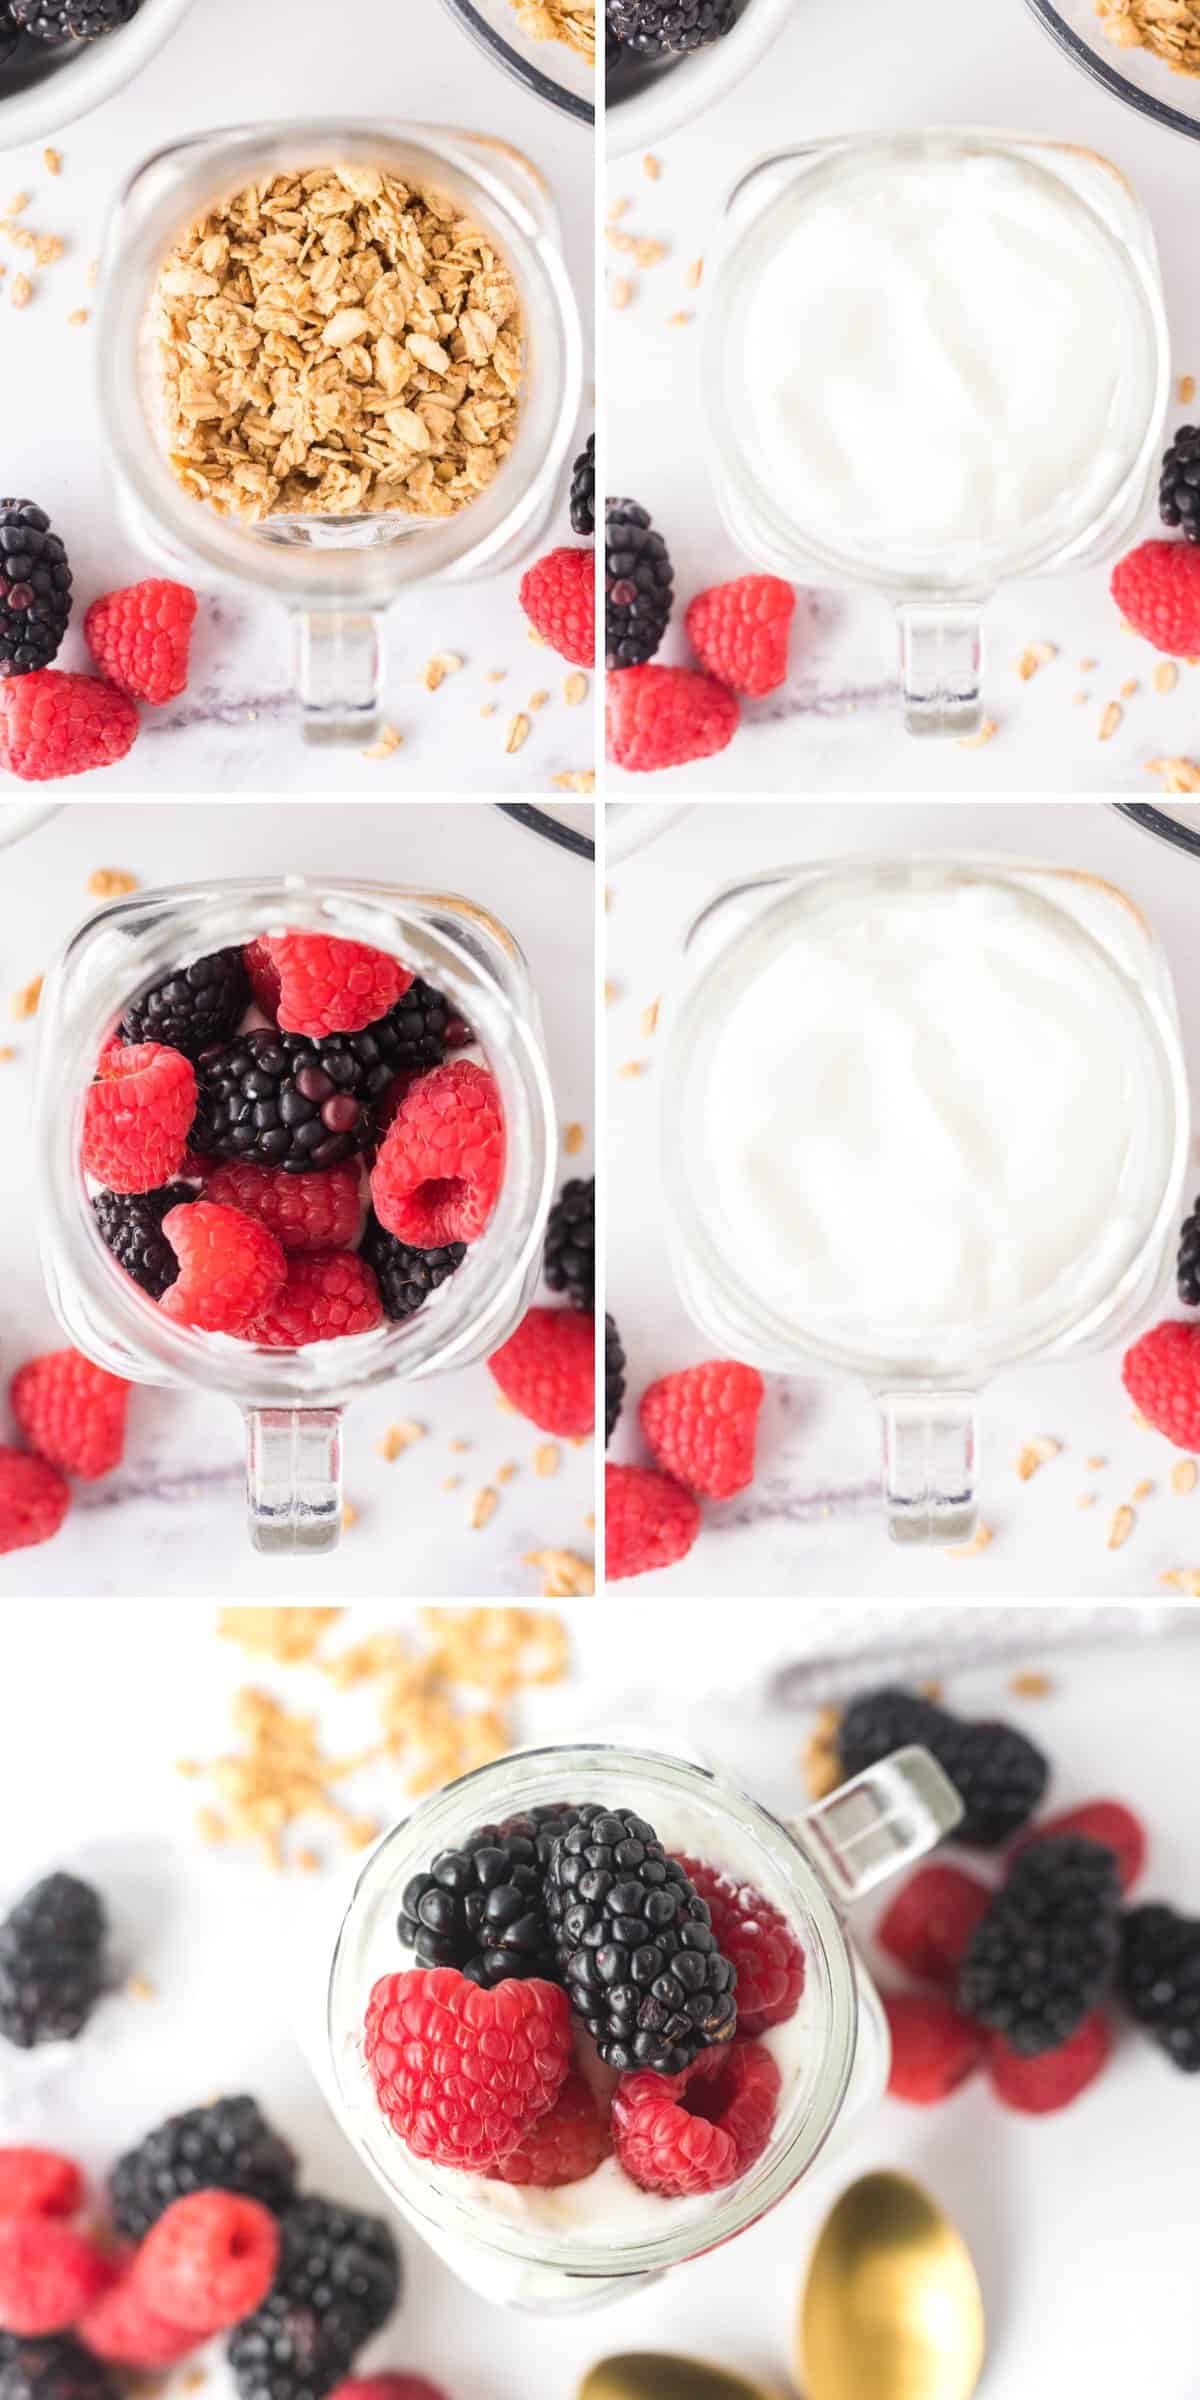 Collage image showing step-by-step layering of granola, yogurt, mixed berries, yogurt, and then topped with berries to make a berry yogurt parfait.